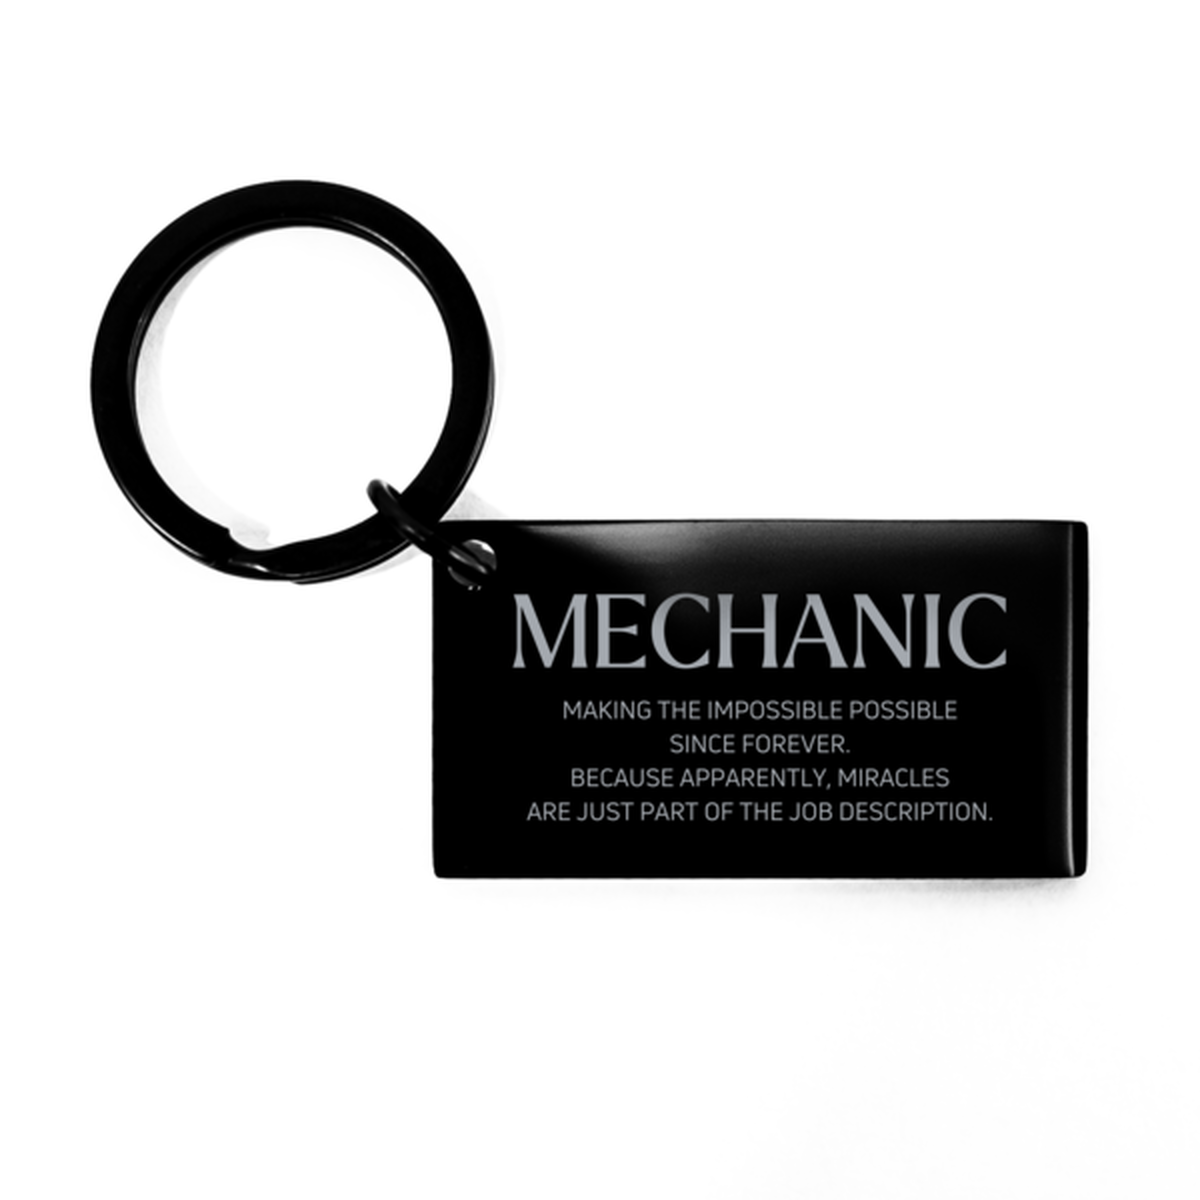 Funny Mechanic Gifts, Miracles are just part of the job description, Inspirational Birthday Keychain For Mechanic, Men, Women, Coworkers, Friends, Boss